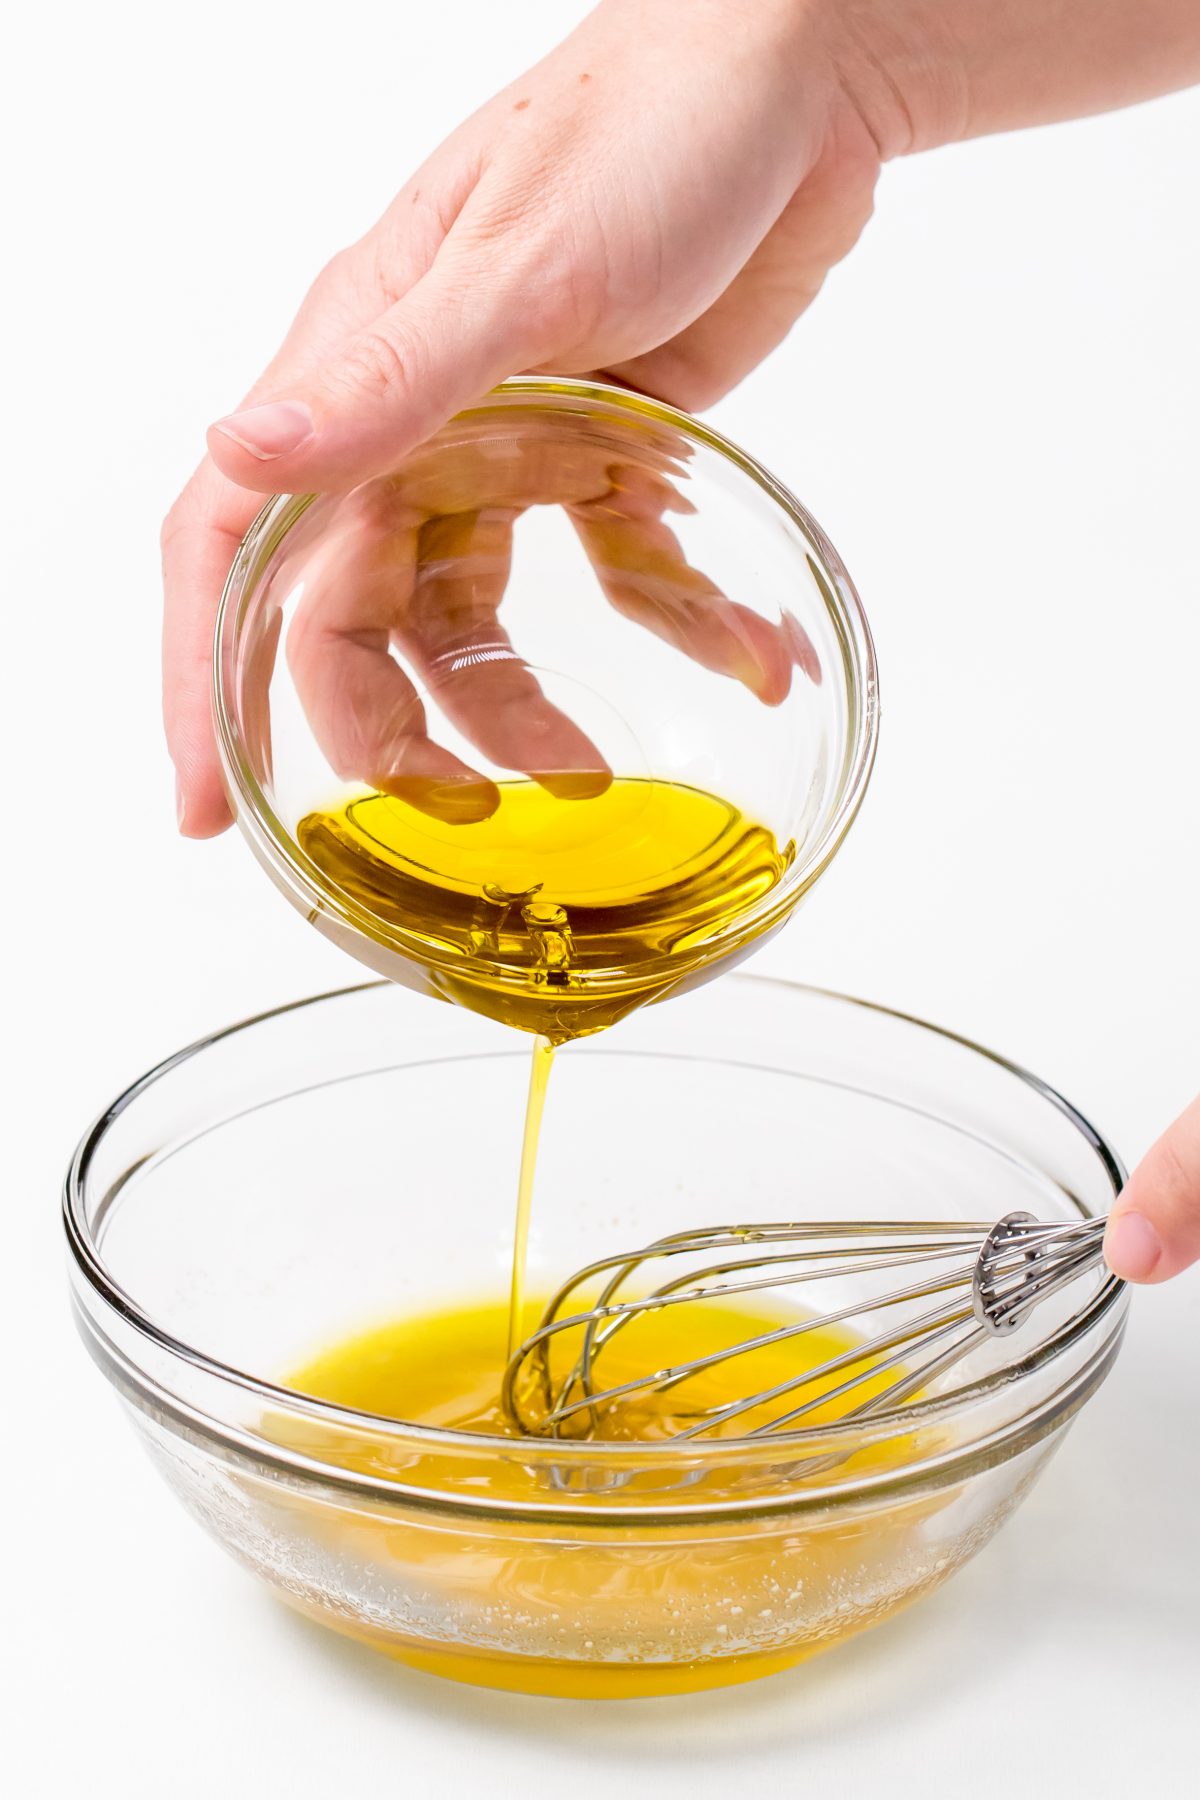 Adding extra virgin olive oil to dressing